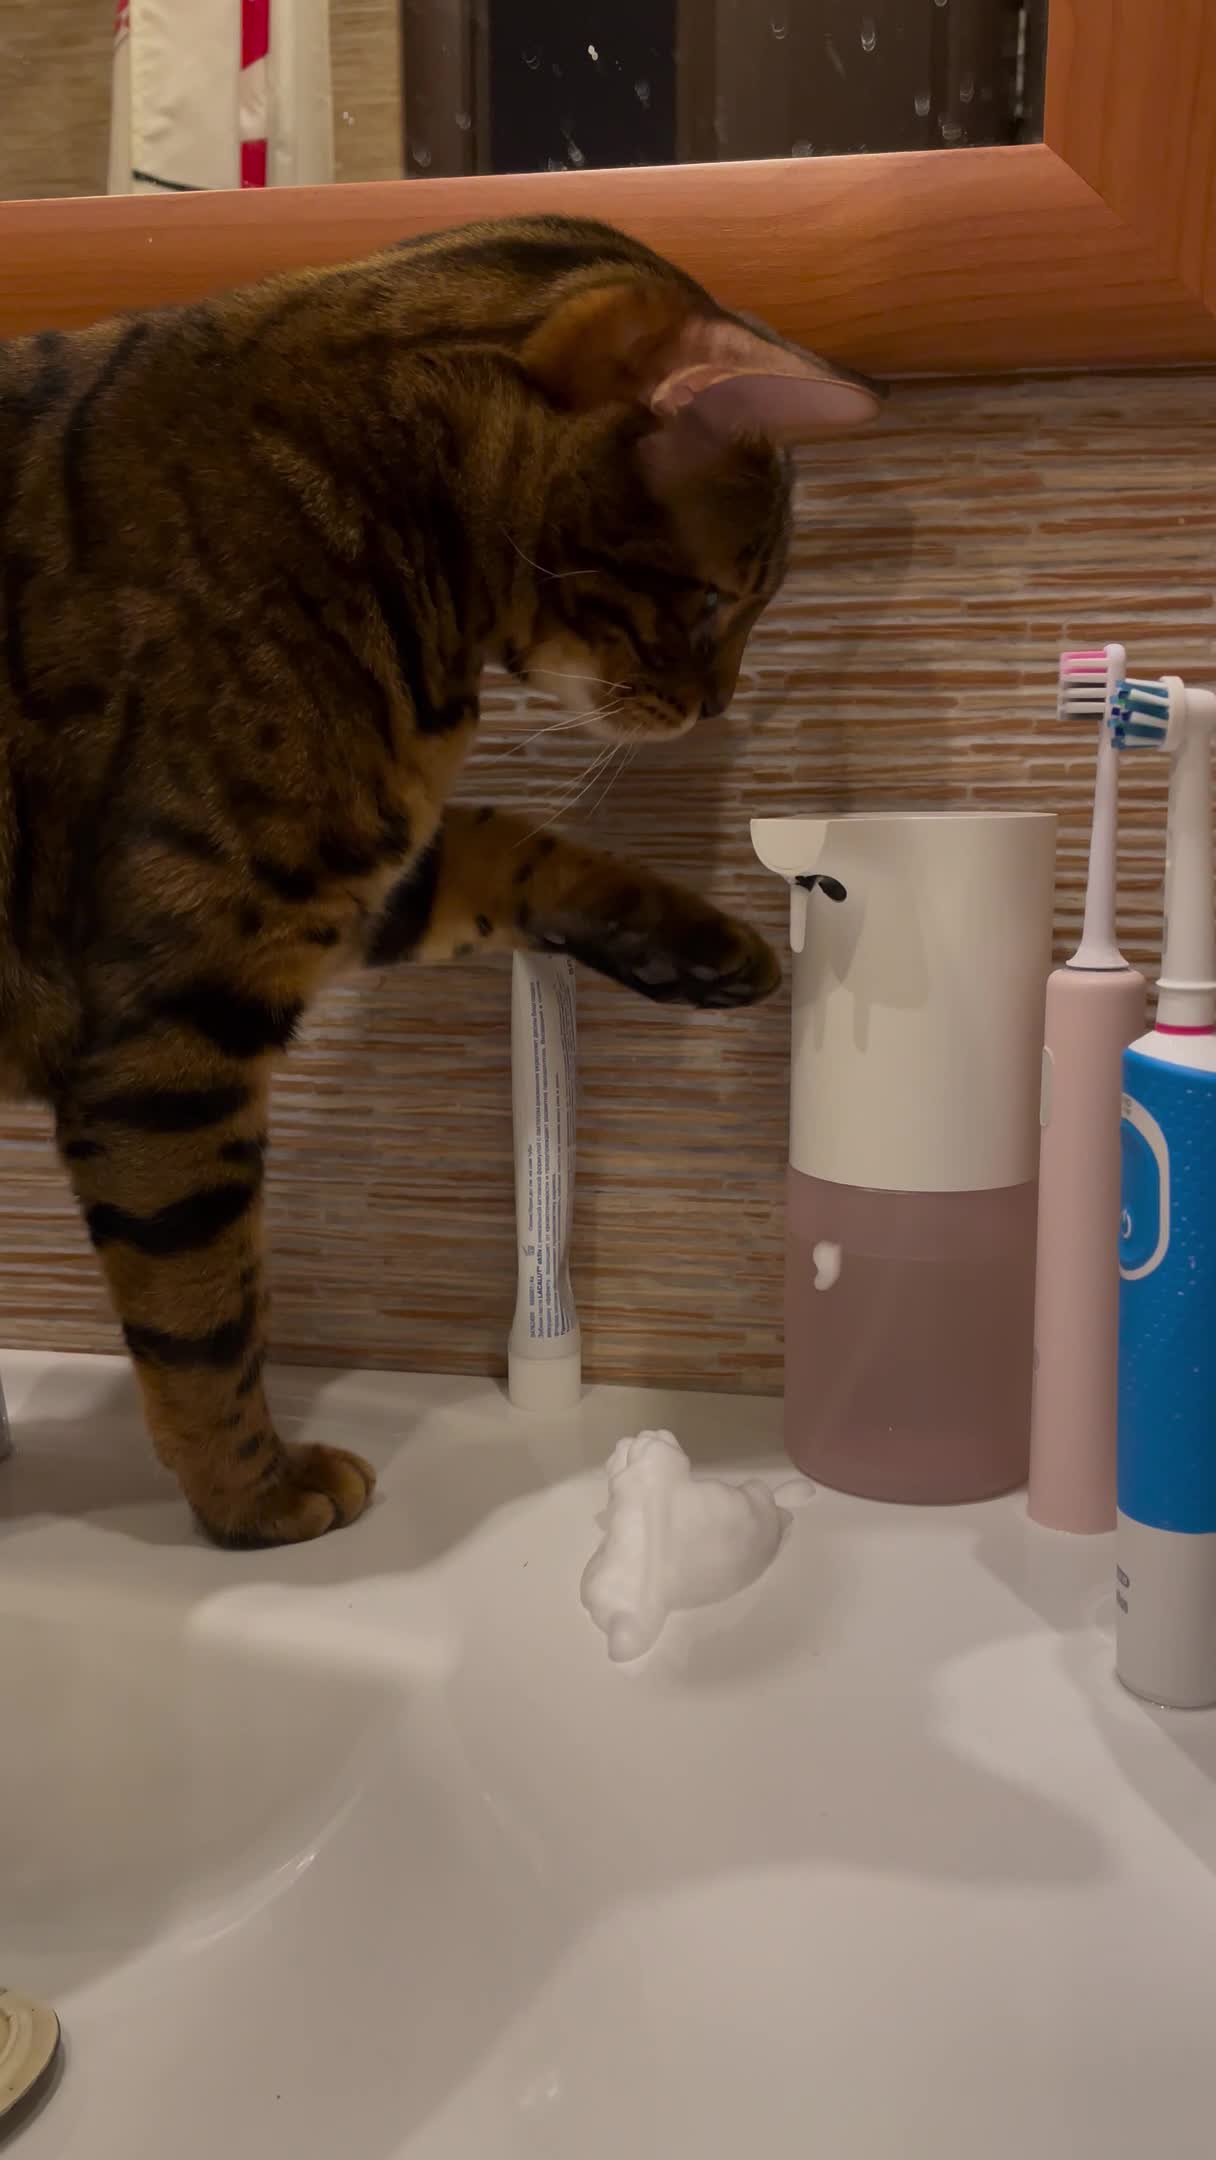 Clever Kitty Discovers Automated Soap Dispenser